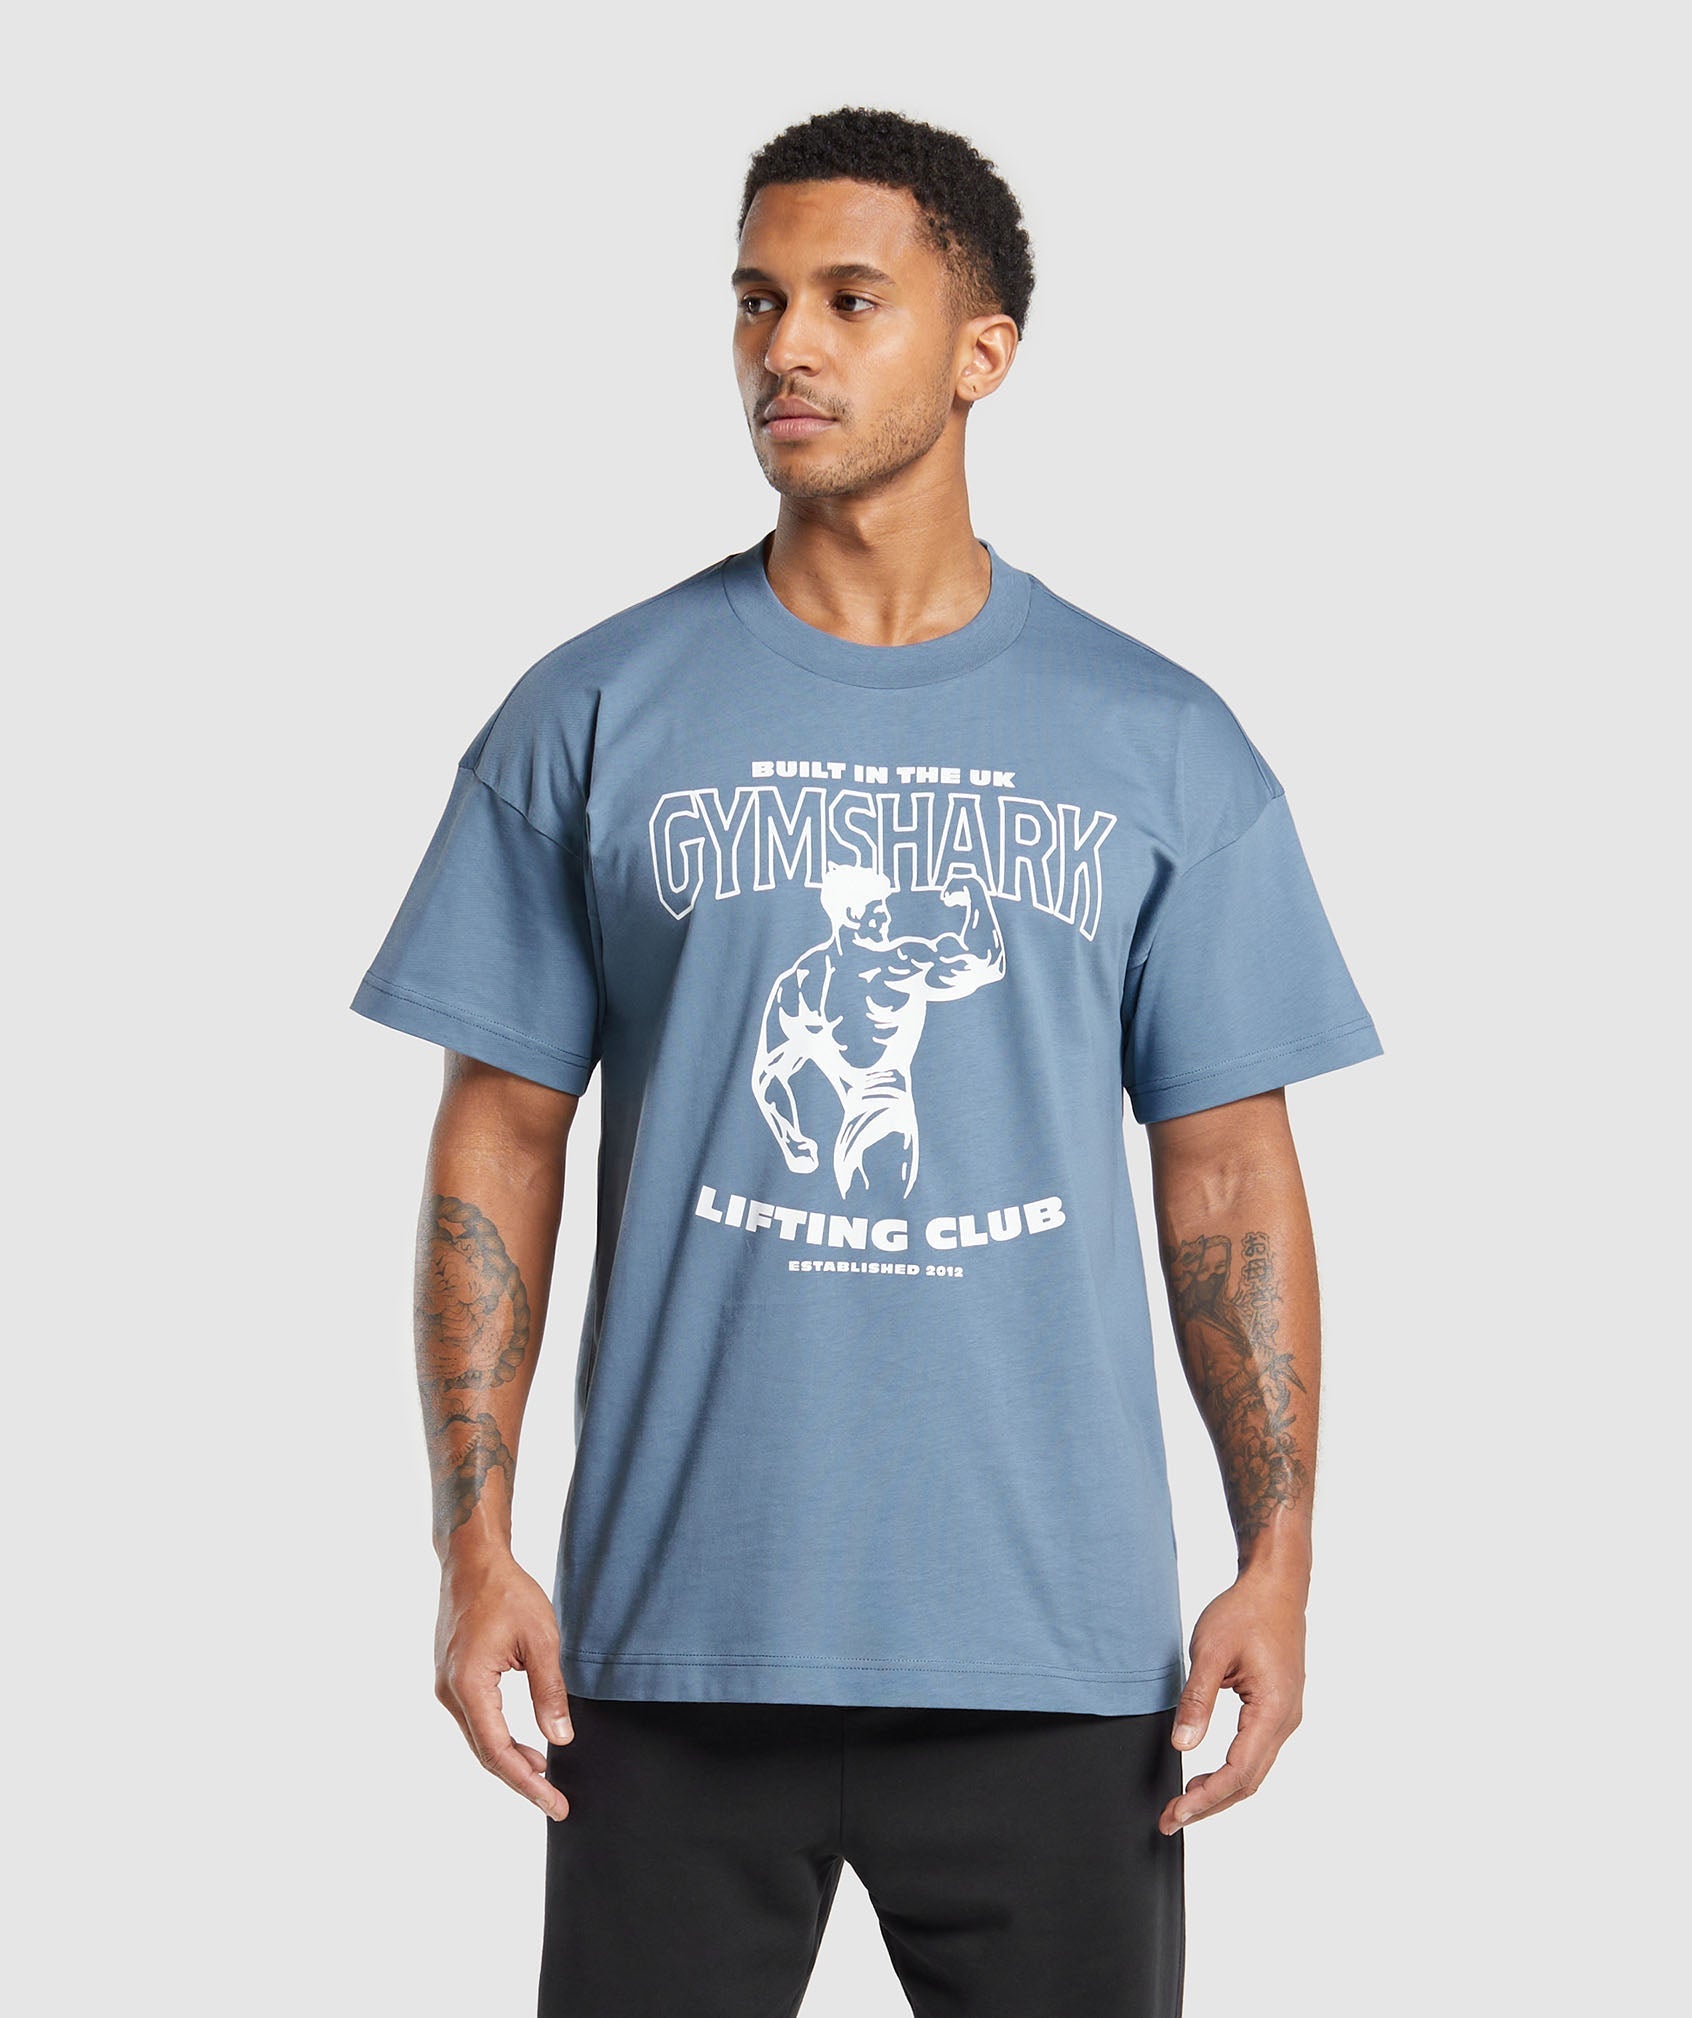 Built in the UK T-Shirt in Faded Blue - view 1